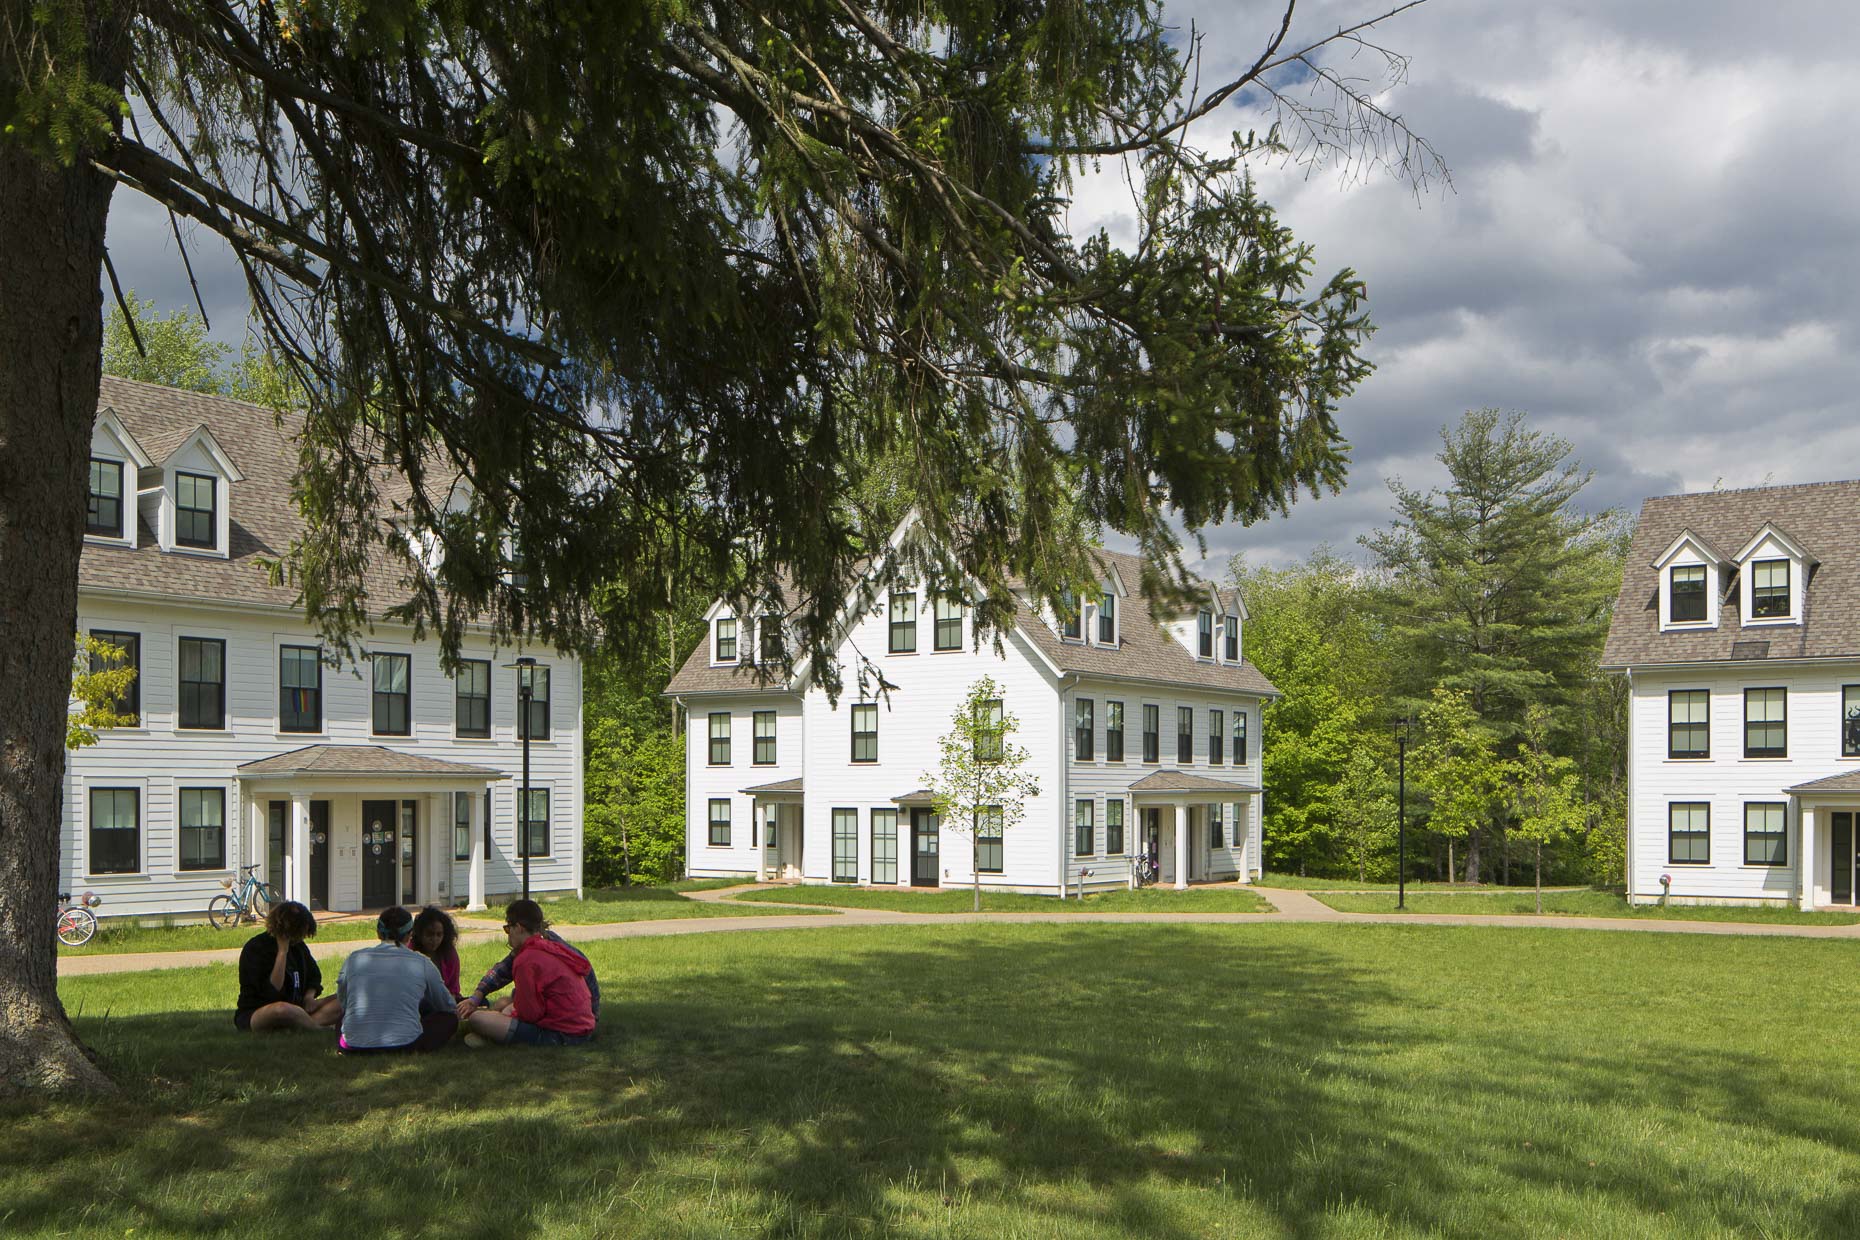 North Campus Housing at Kenyon College photographed by Brad Feinknopf based in Columbus, Ohio